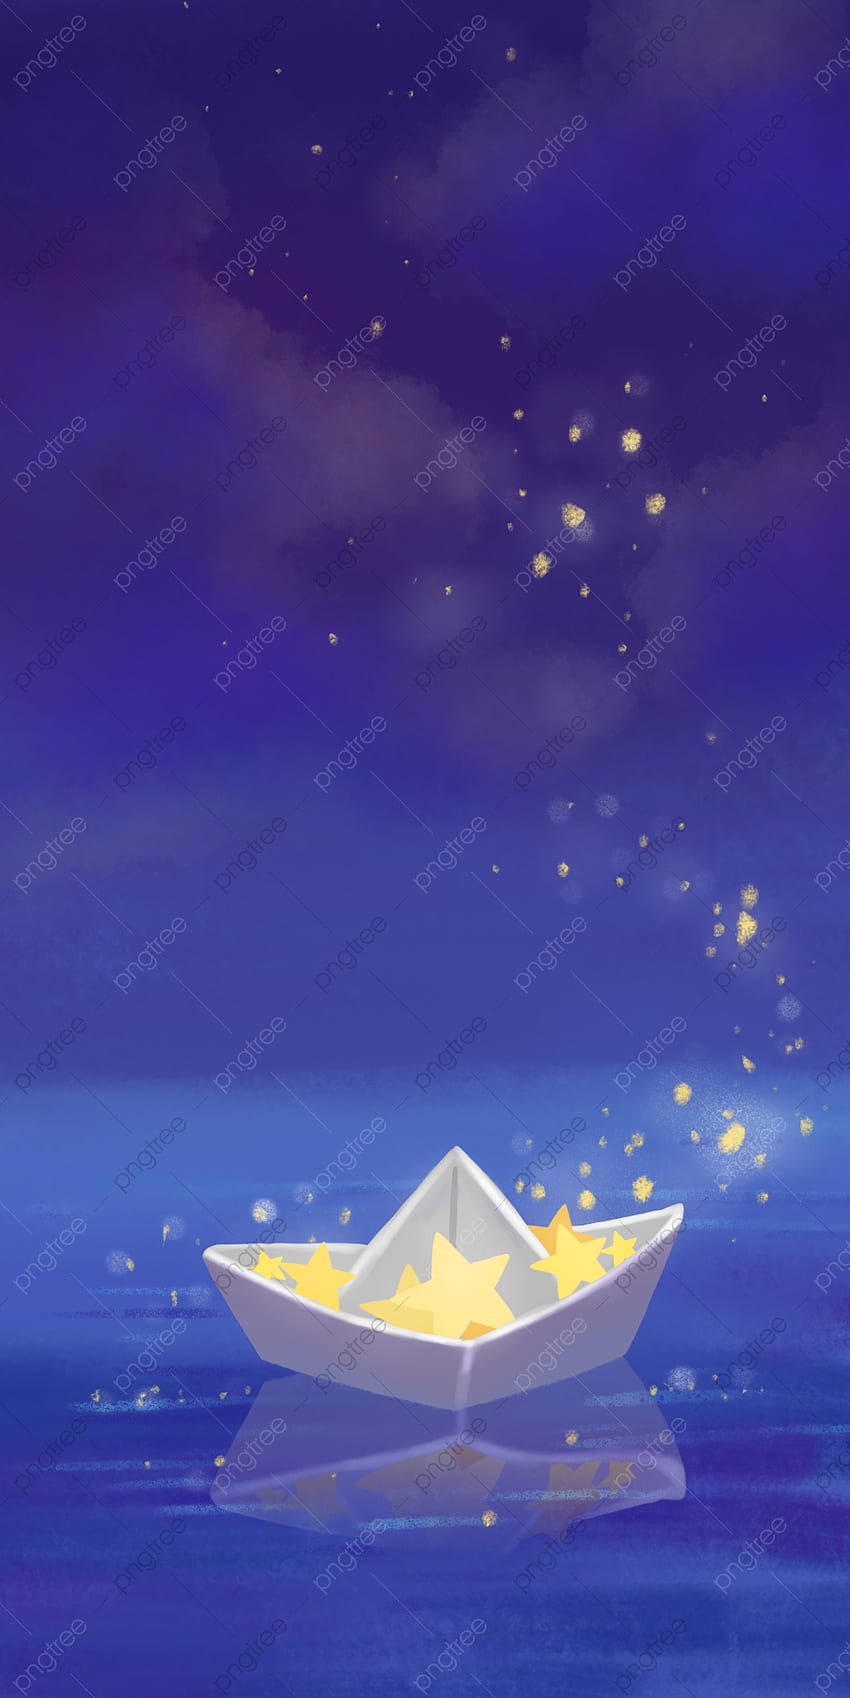 Star Paper Ship Dream Sky Fantasy Mobile Phone Background, Dream, Sea, Night Background for HD phone wallpaper